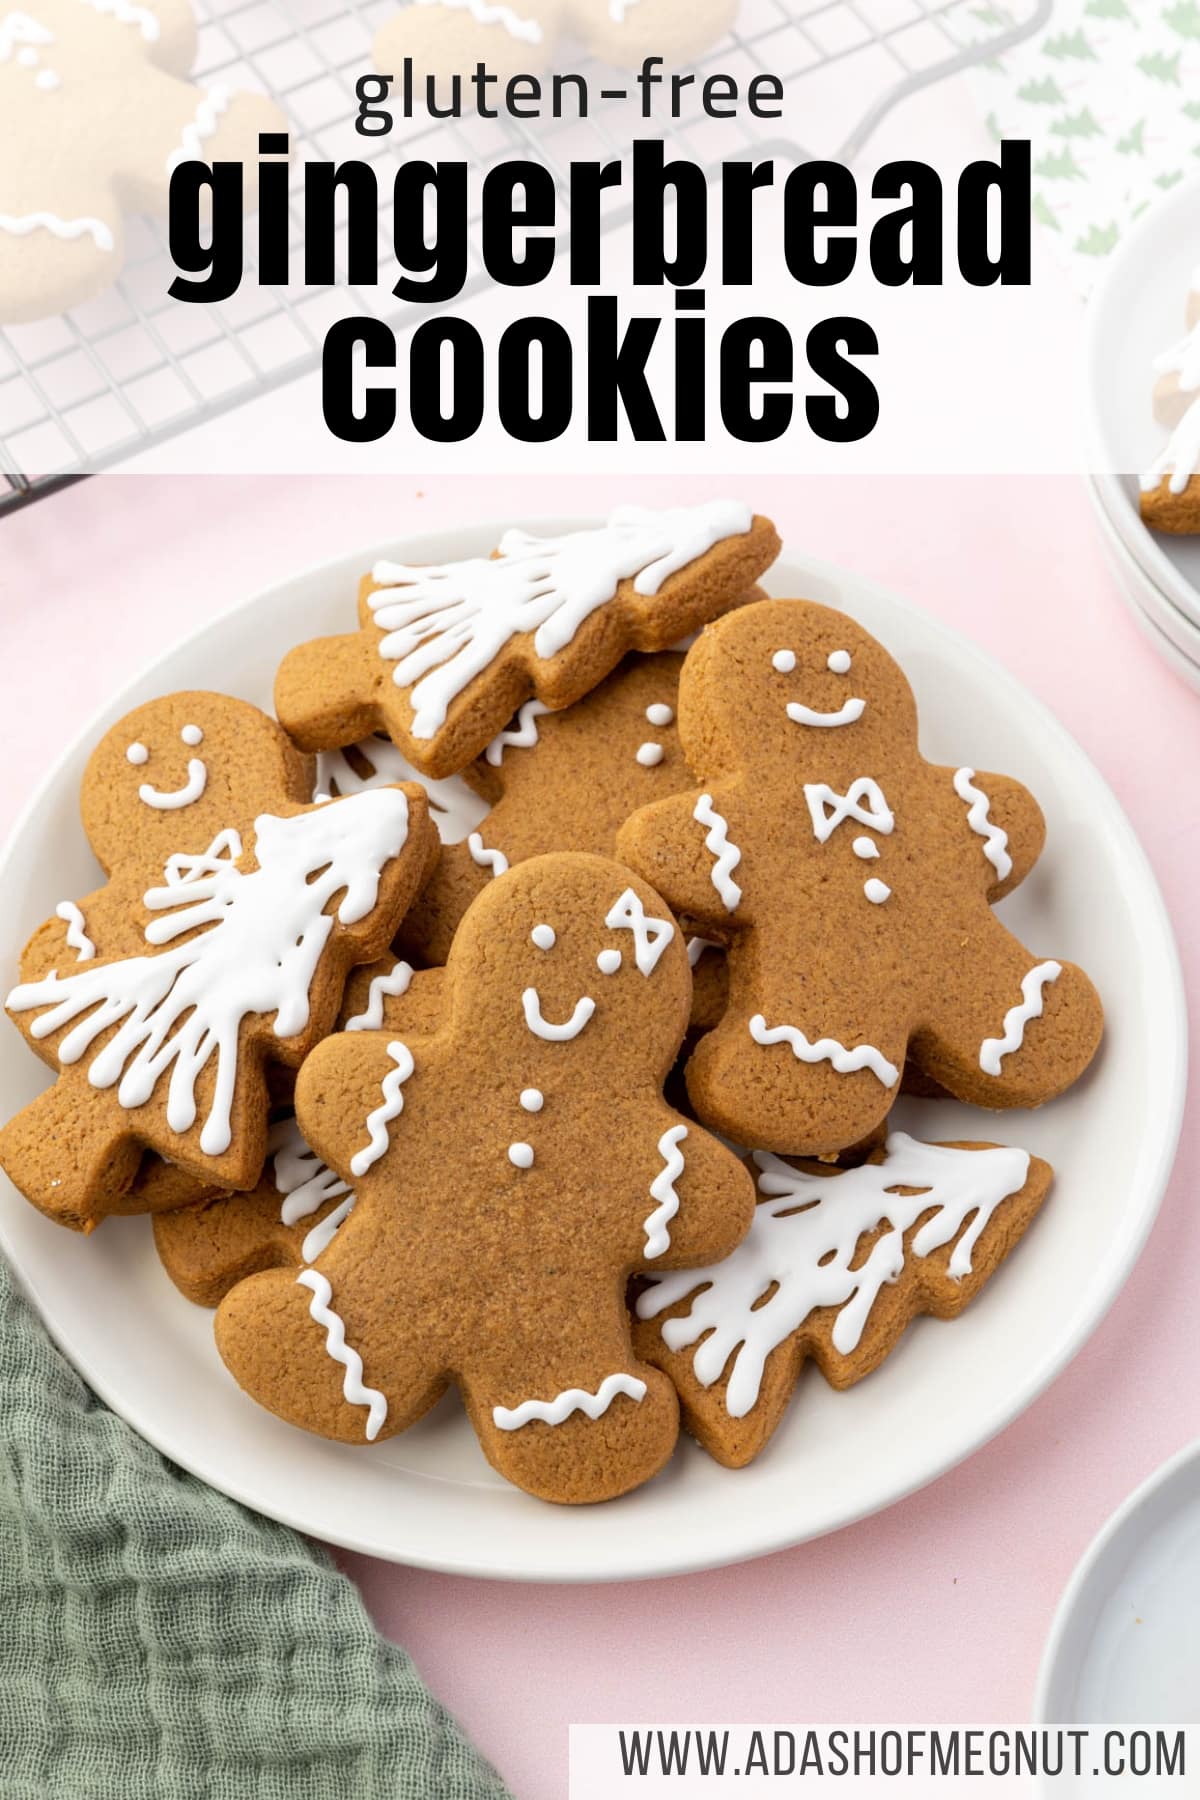 A plate of gluten-free gingerbread cookies shaped like Christmas trees and gingerbread men decorated with royal icing.